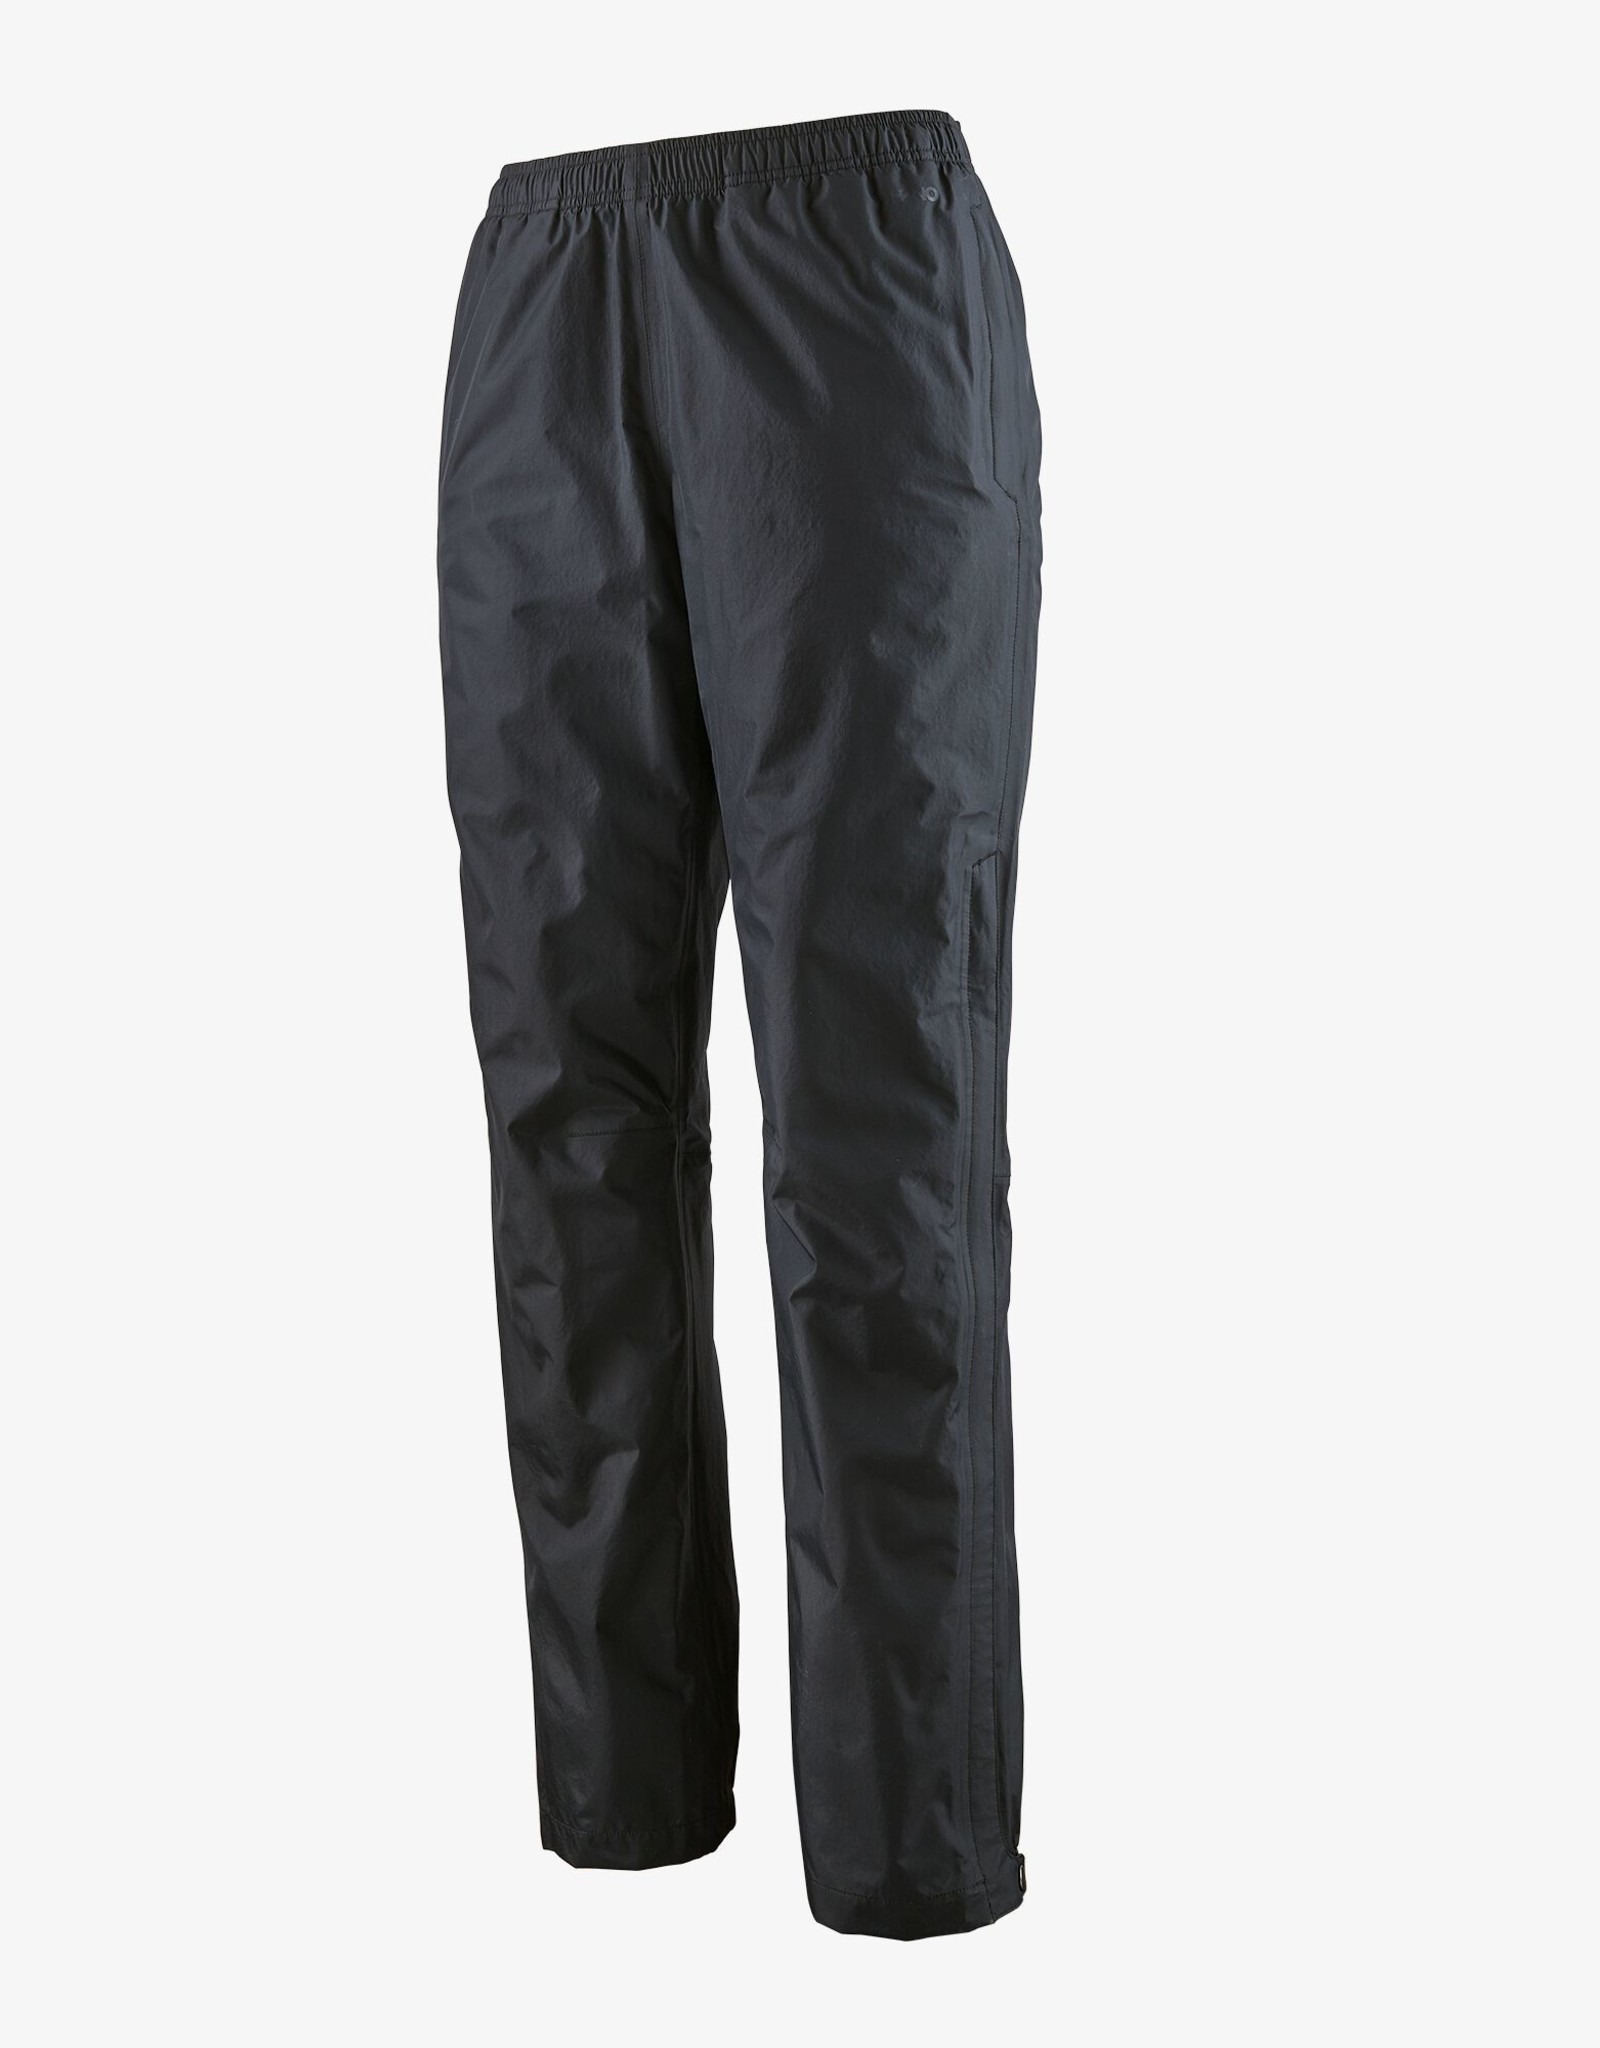 fusion håber Udrydde Patagonia W's Torrentshell Pants - Reg - Onion River Outdoors